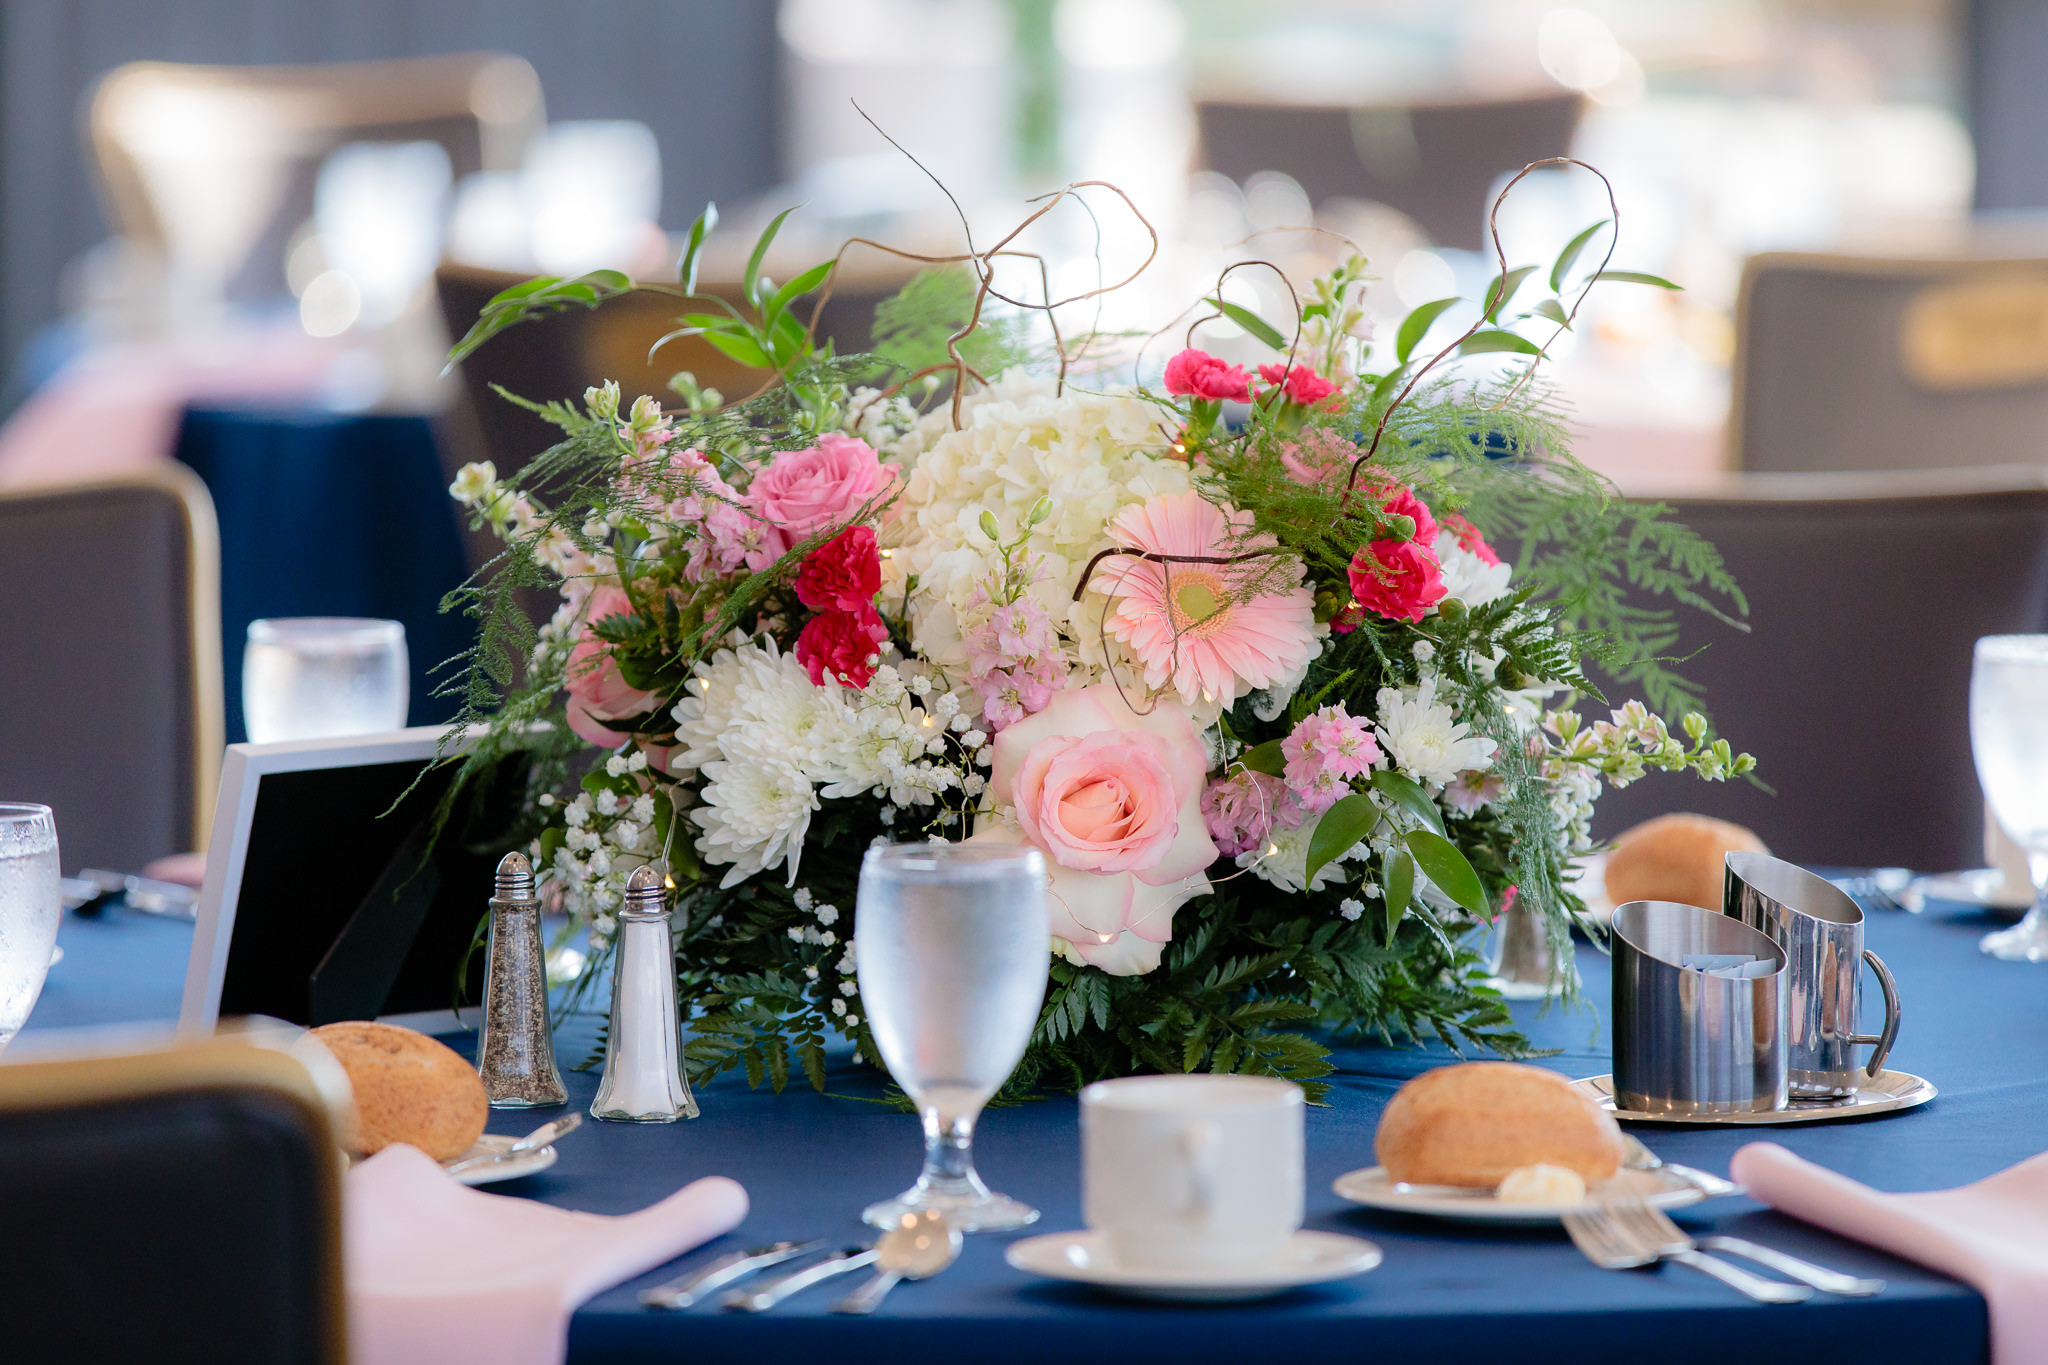 Floral centerpieces by Fields of Heather at a Duquesne University wedding reception